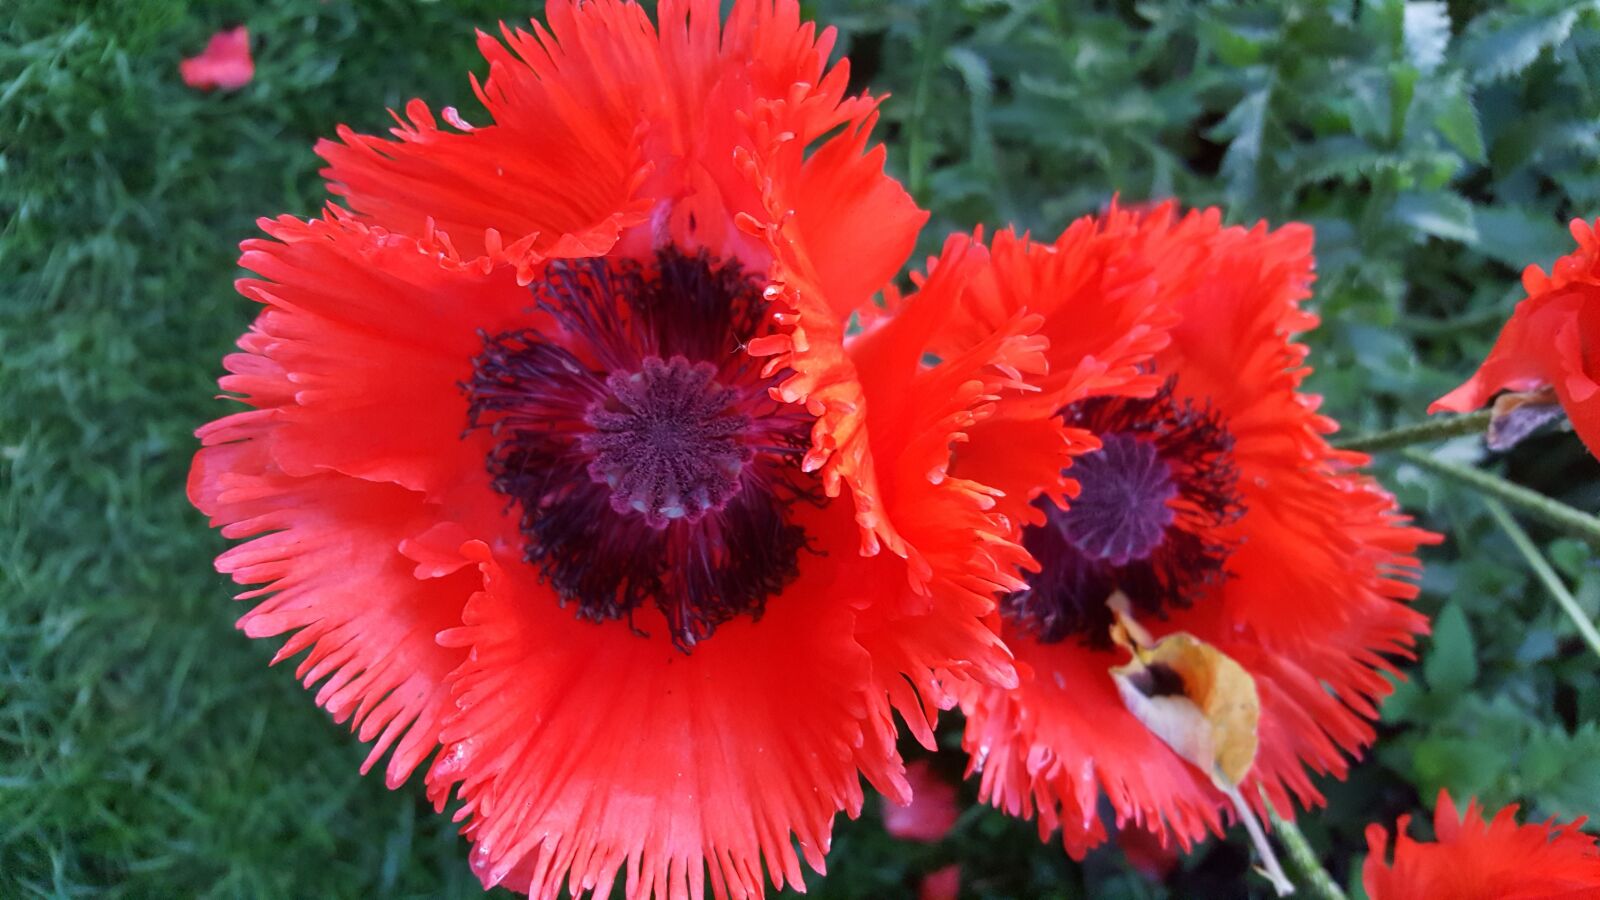 Samsung Galaxy S6 sample photo. Poppy, red, nature photography